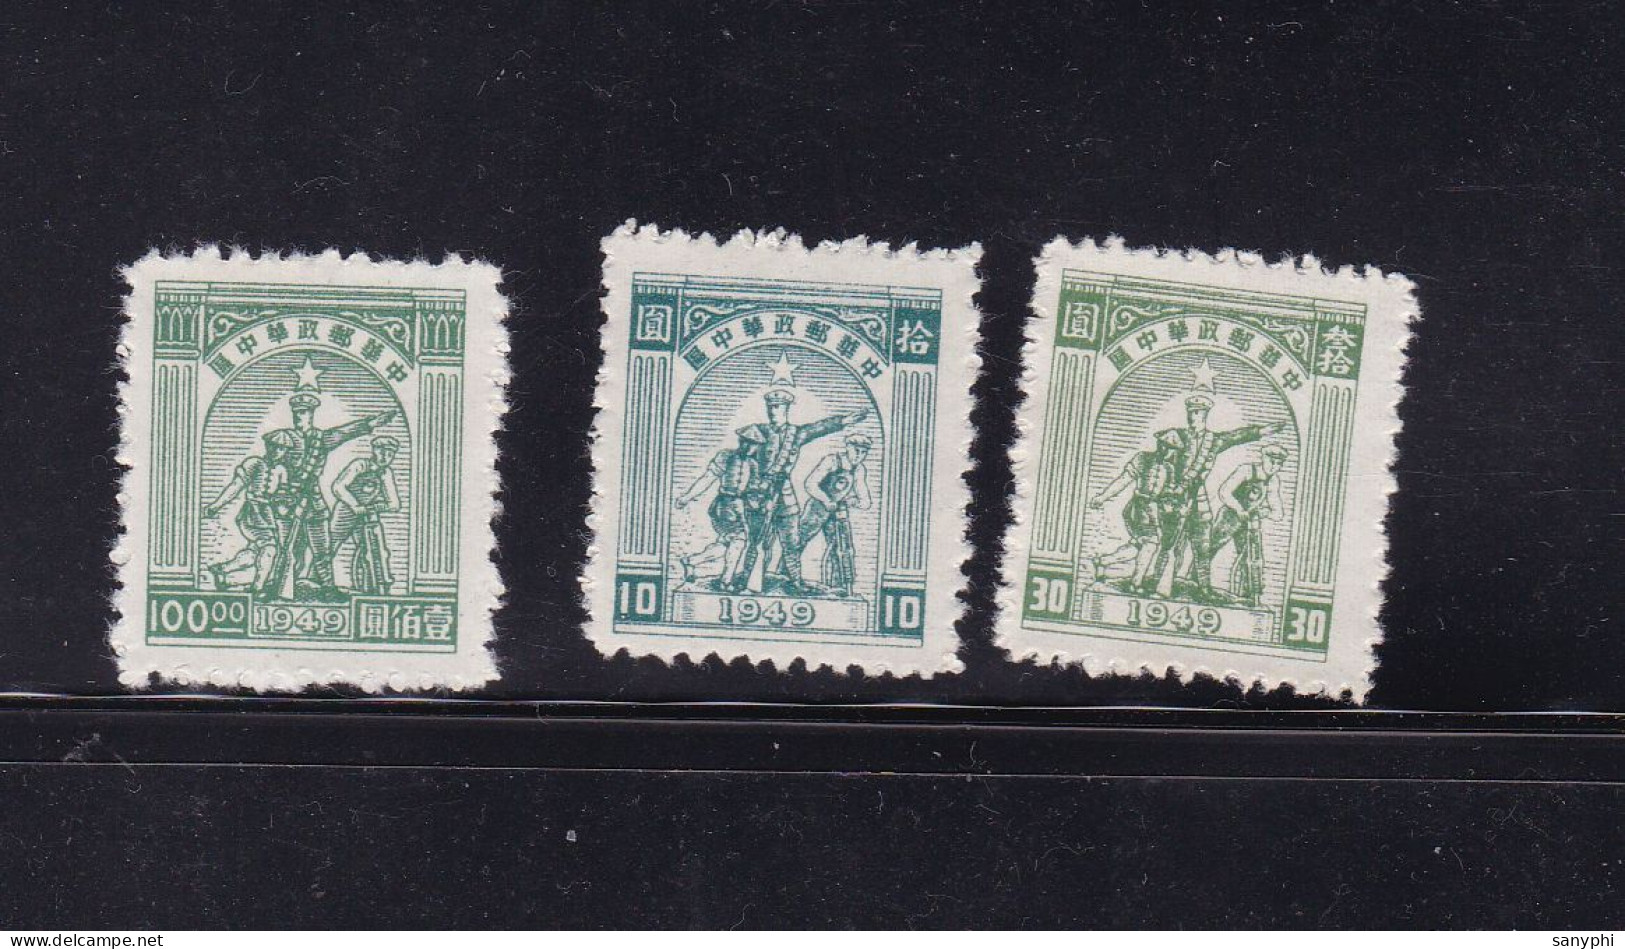 Chine China 1949 Peason Soldier And Workman 10c,30c,100c ML - China Central 1948-49